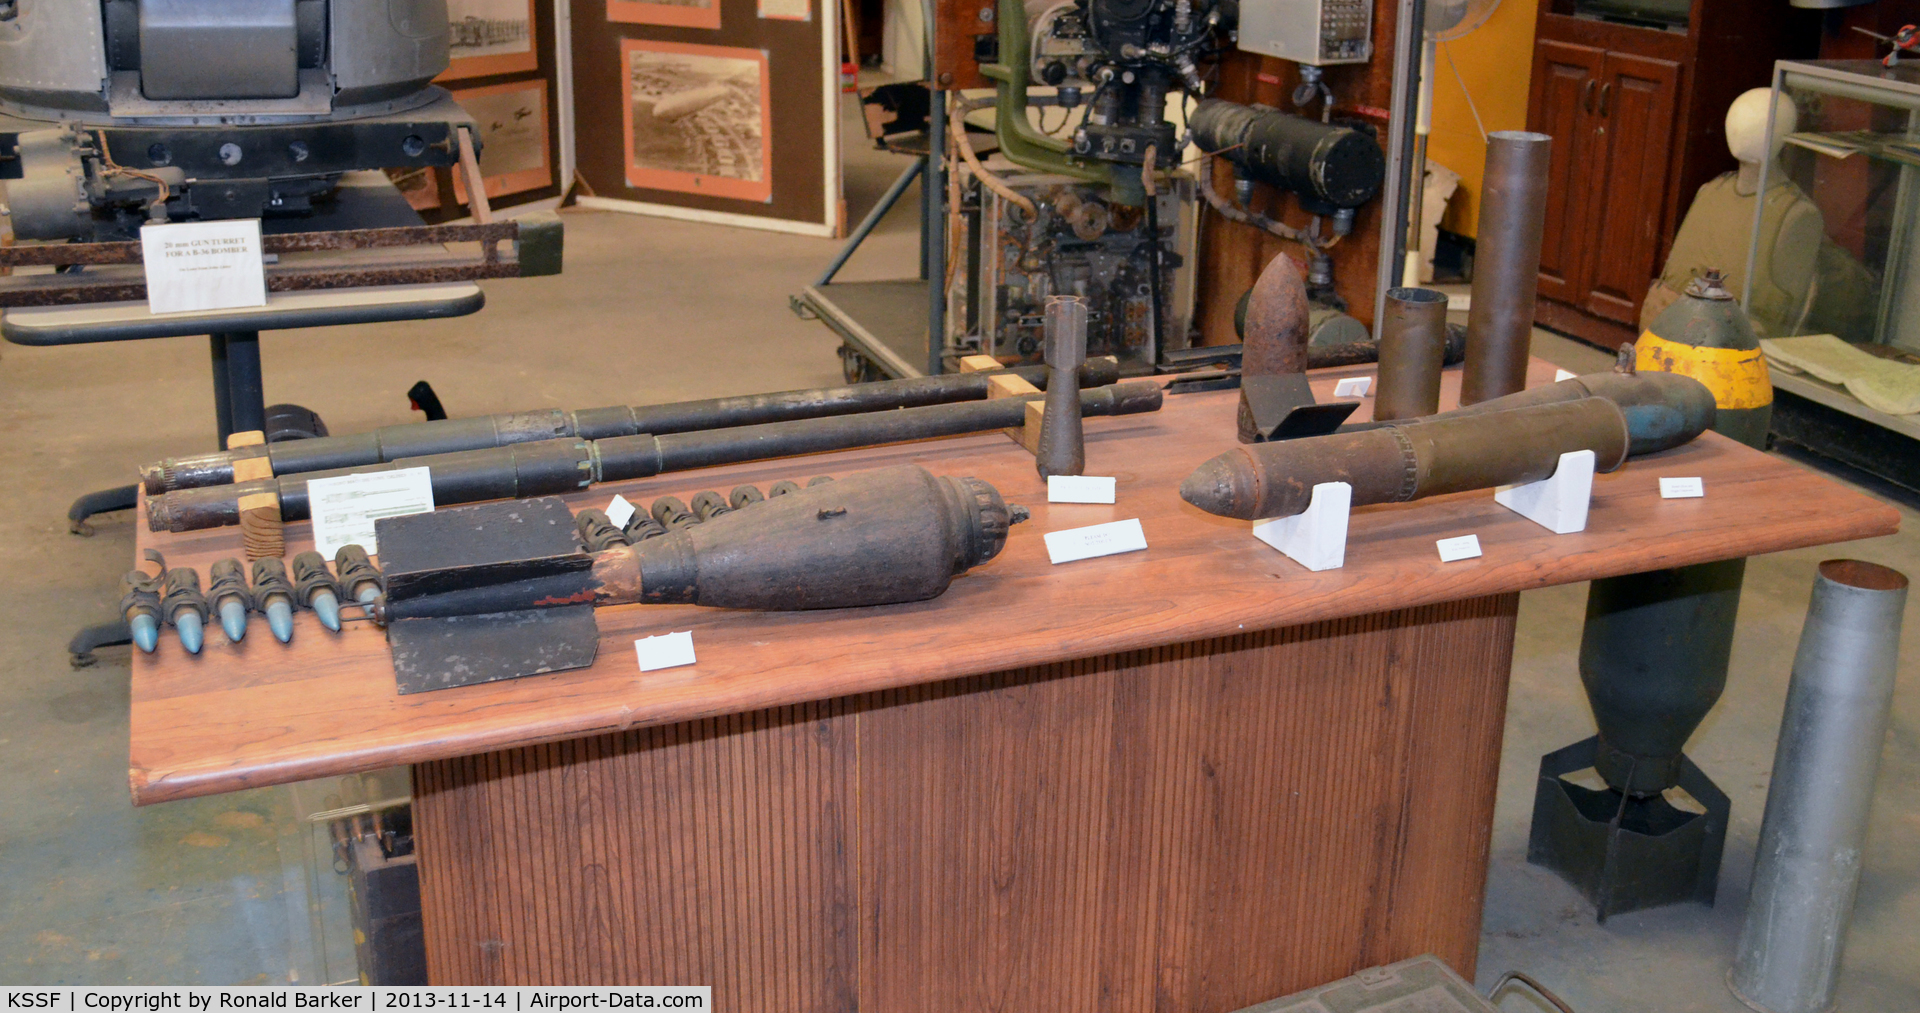 Stinson Municipal Airport (SSF) - Practice ordnance on display at the Texas Air Museum  